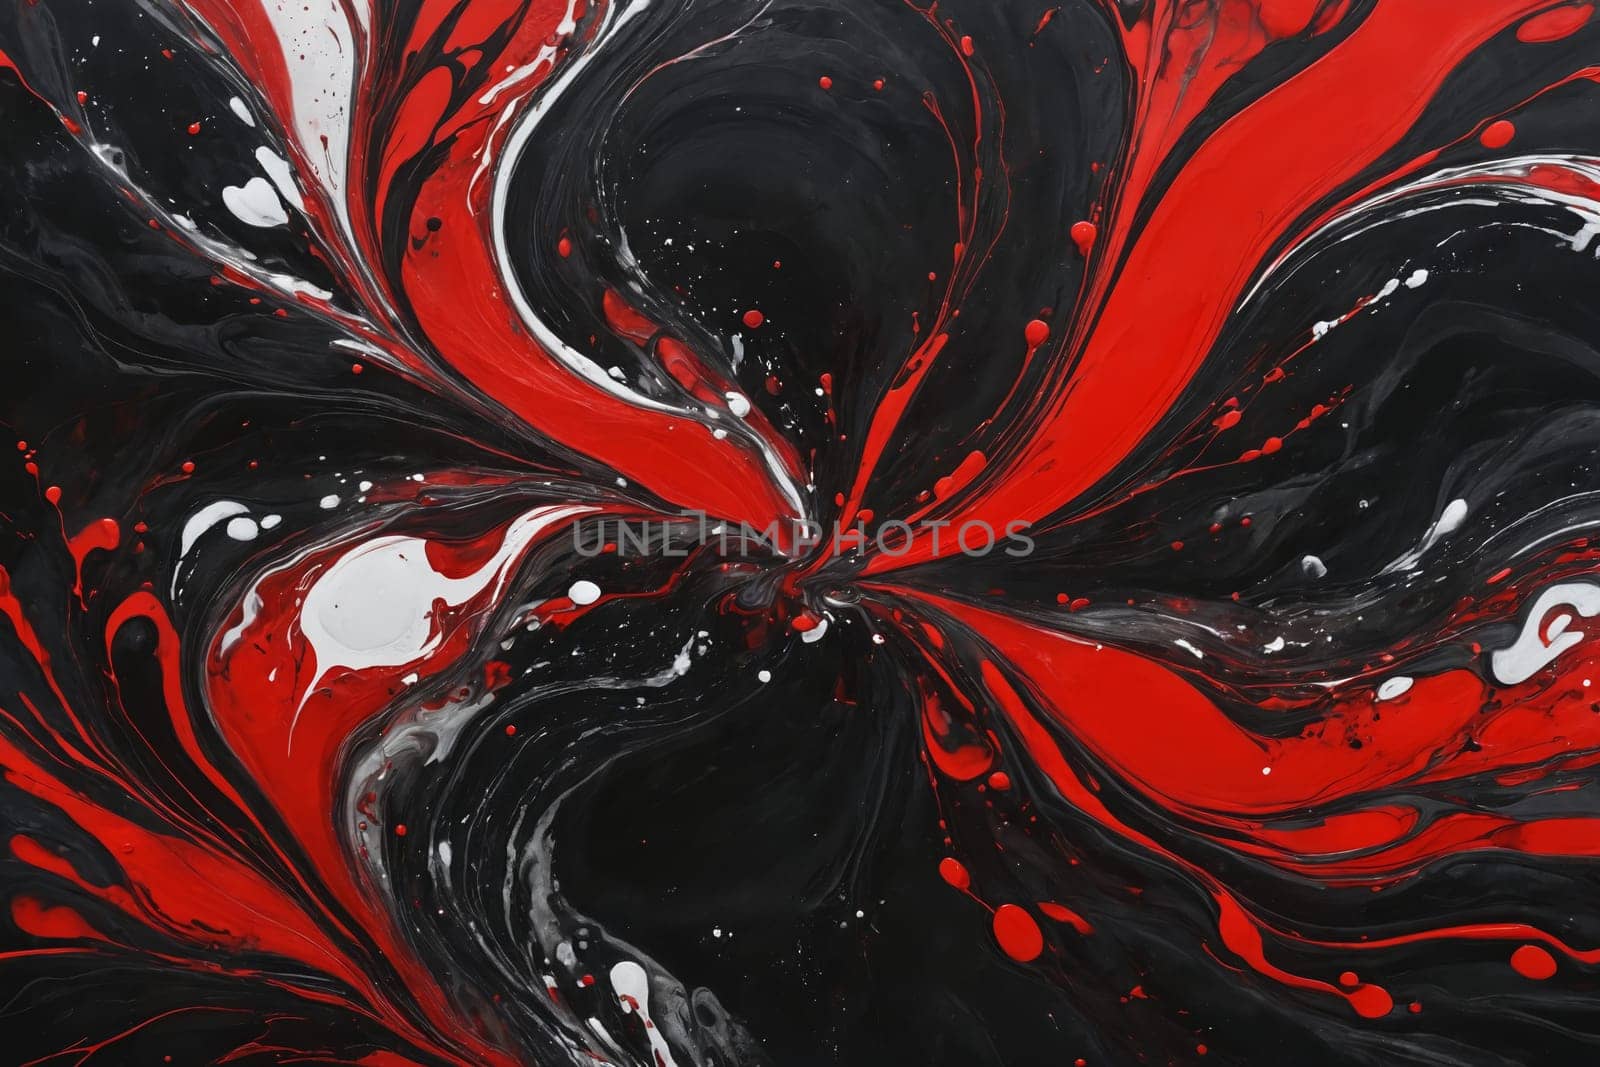 The art of motion captured in an abstract with red and black, the colors swirling in a dance of depth and energy.